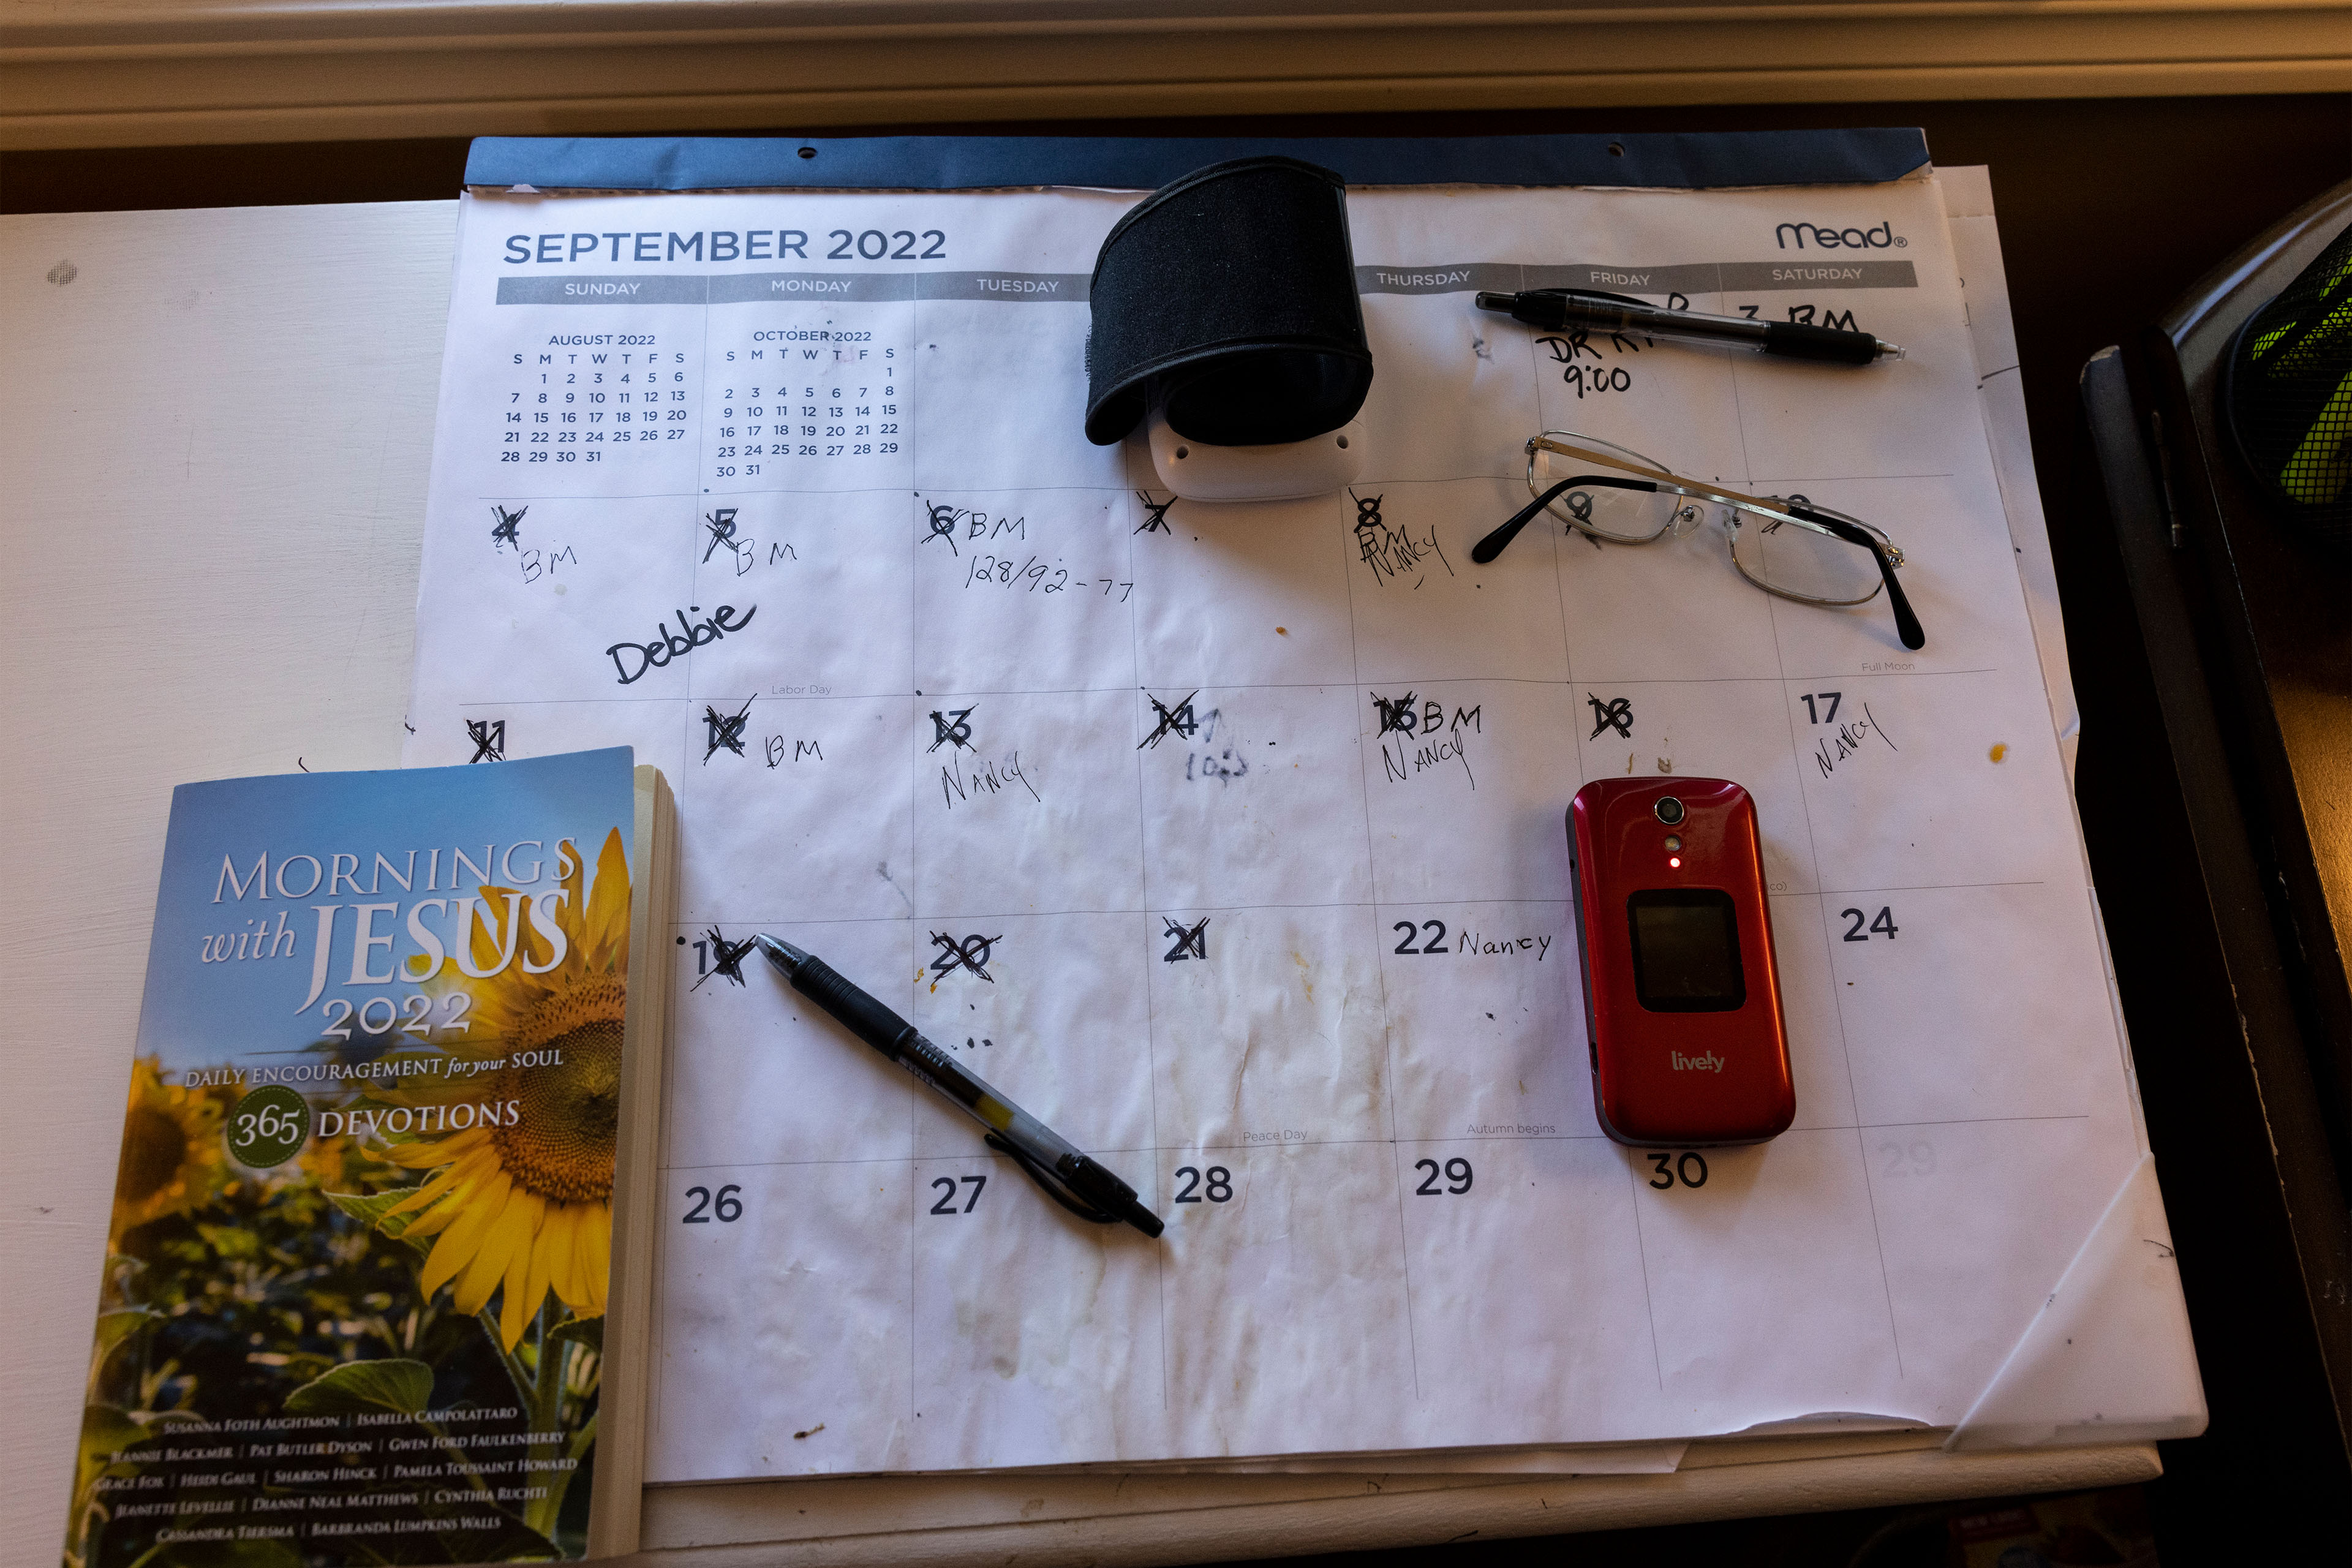 A photo of a calendar, a pair of glasses, a devotional book, a cell phone, and some pens resting on a table.